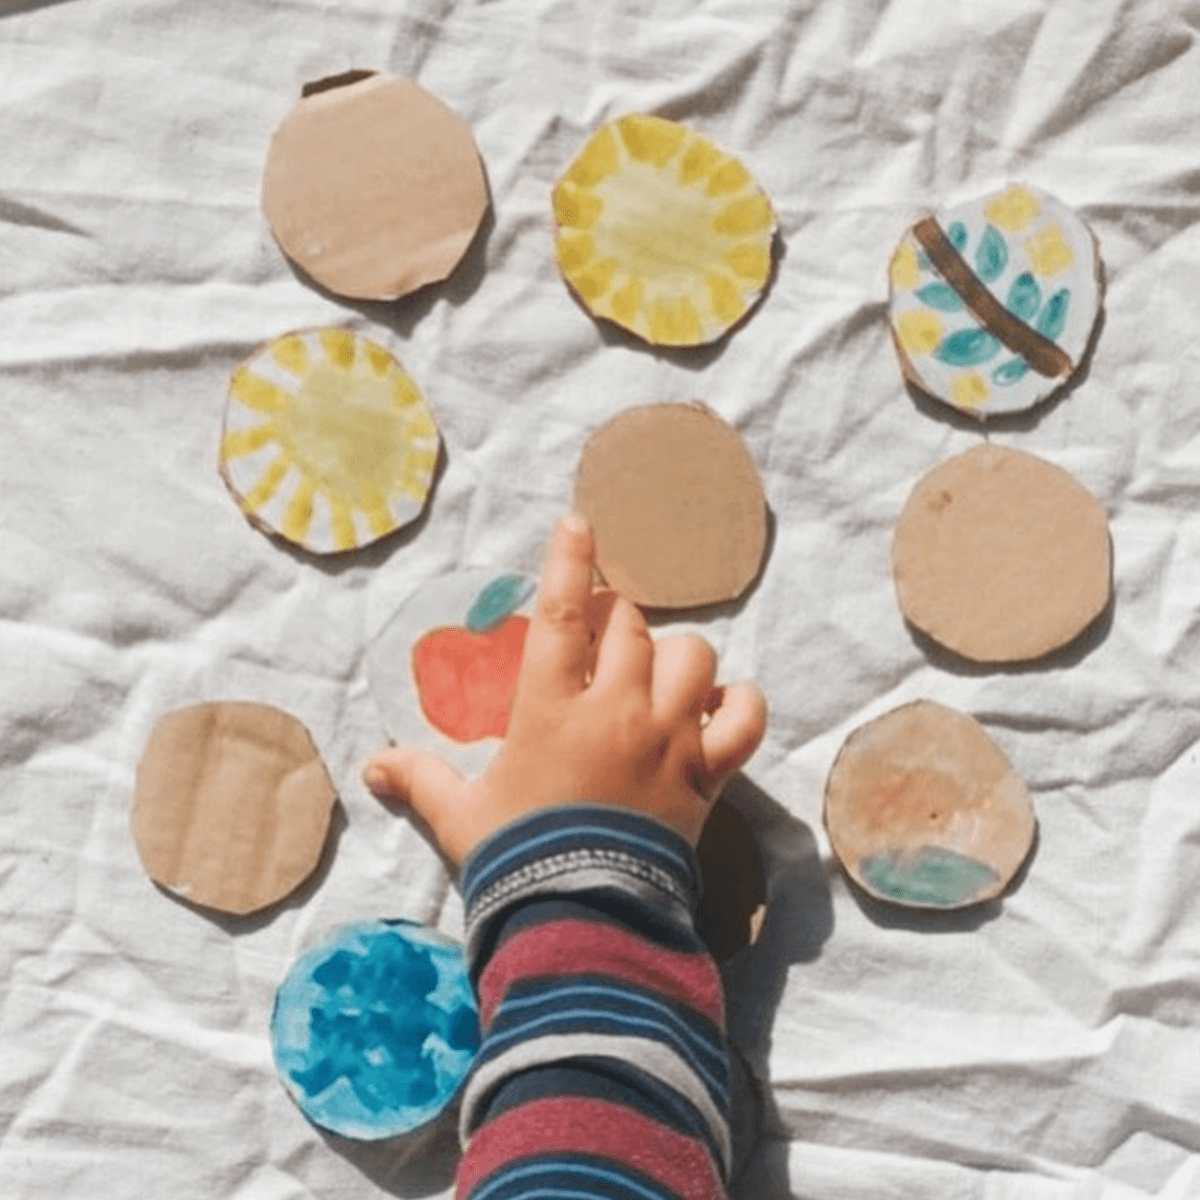 child reaching for a painted memory game created with cardboard and paint